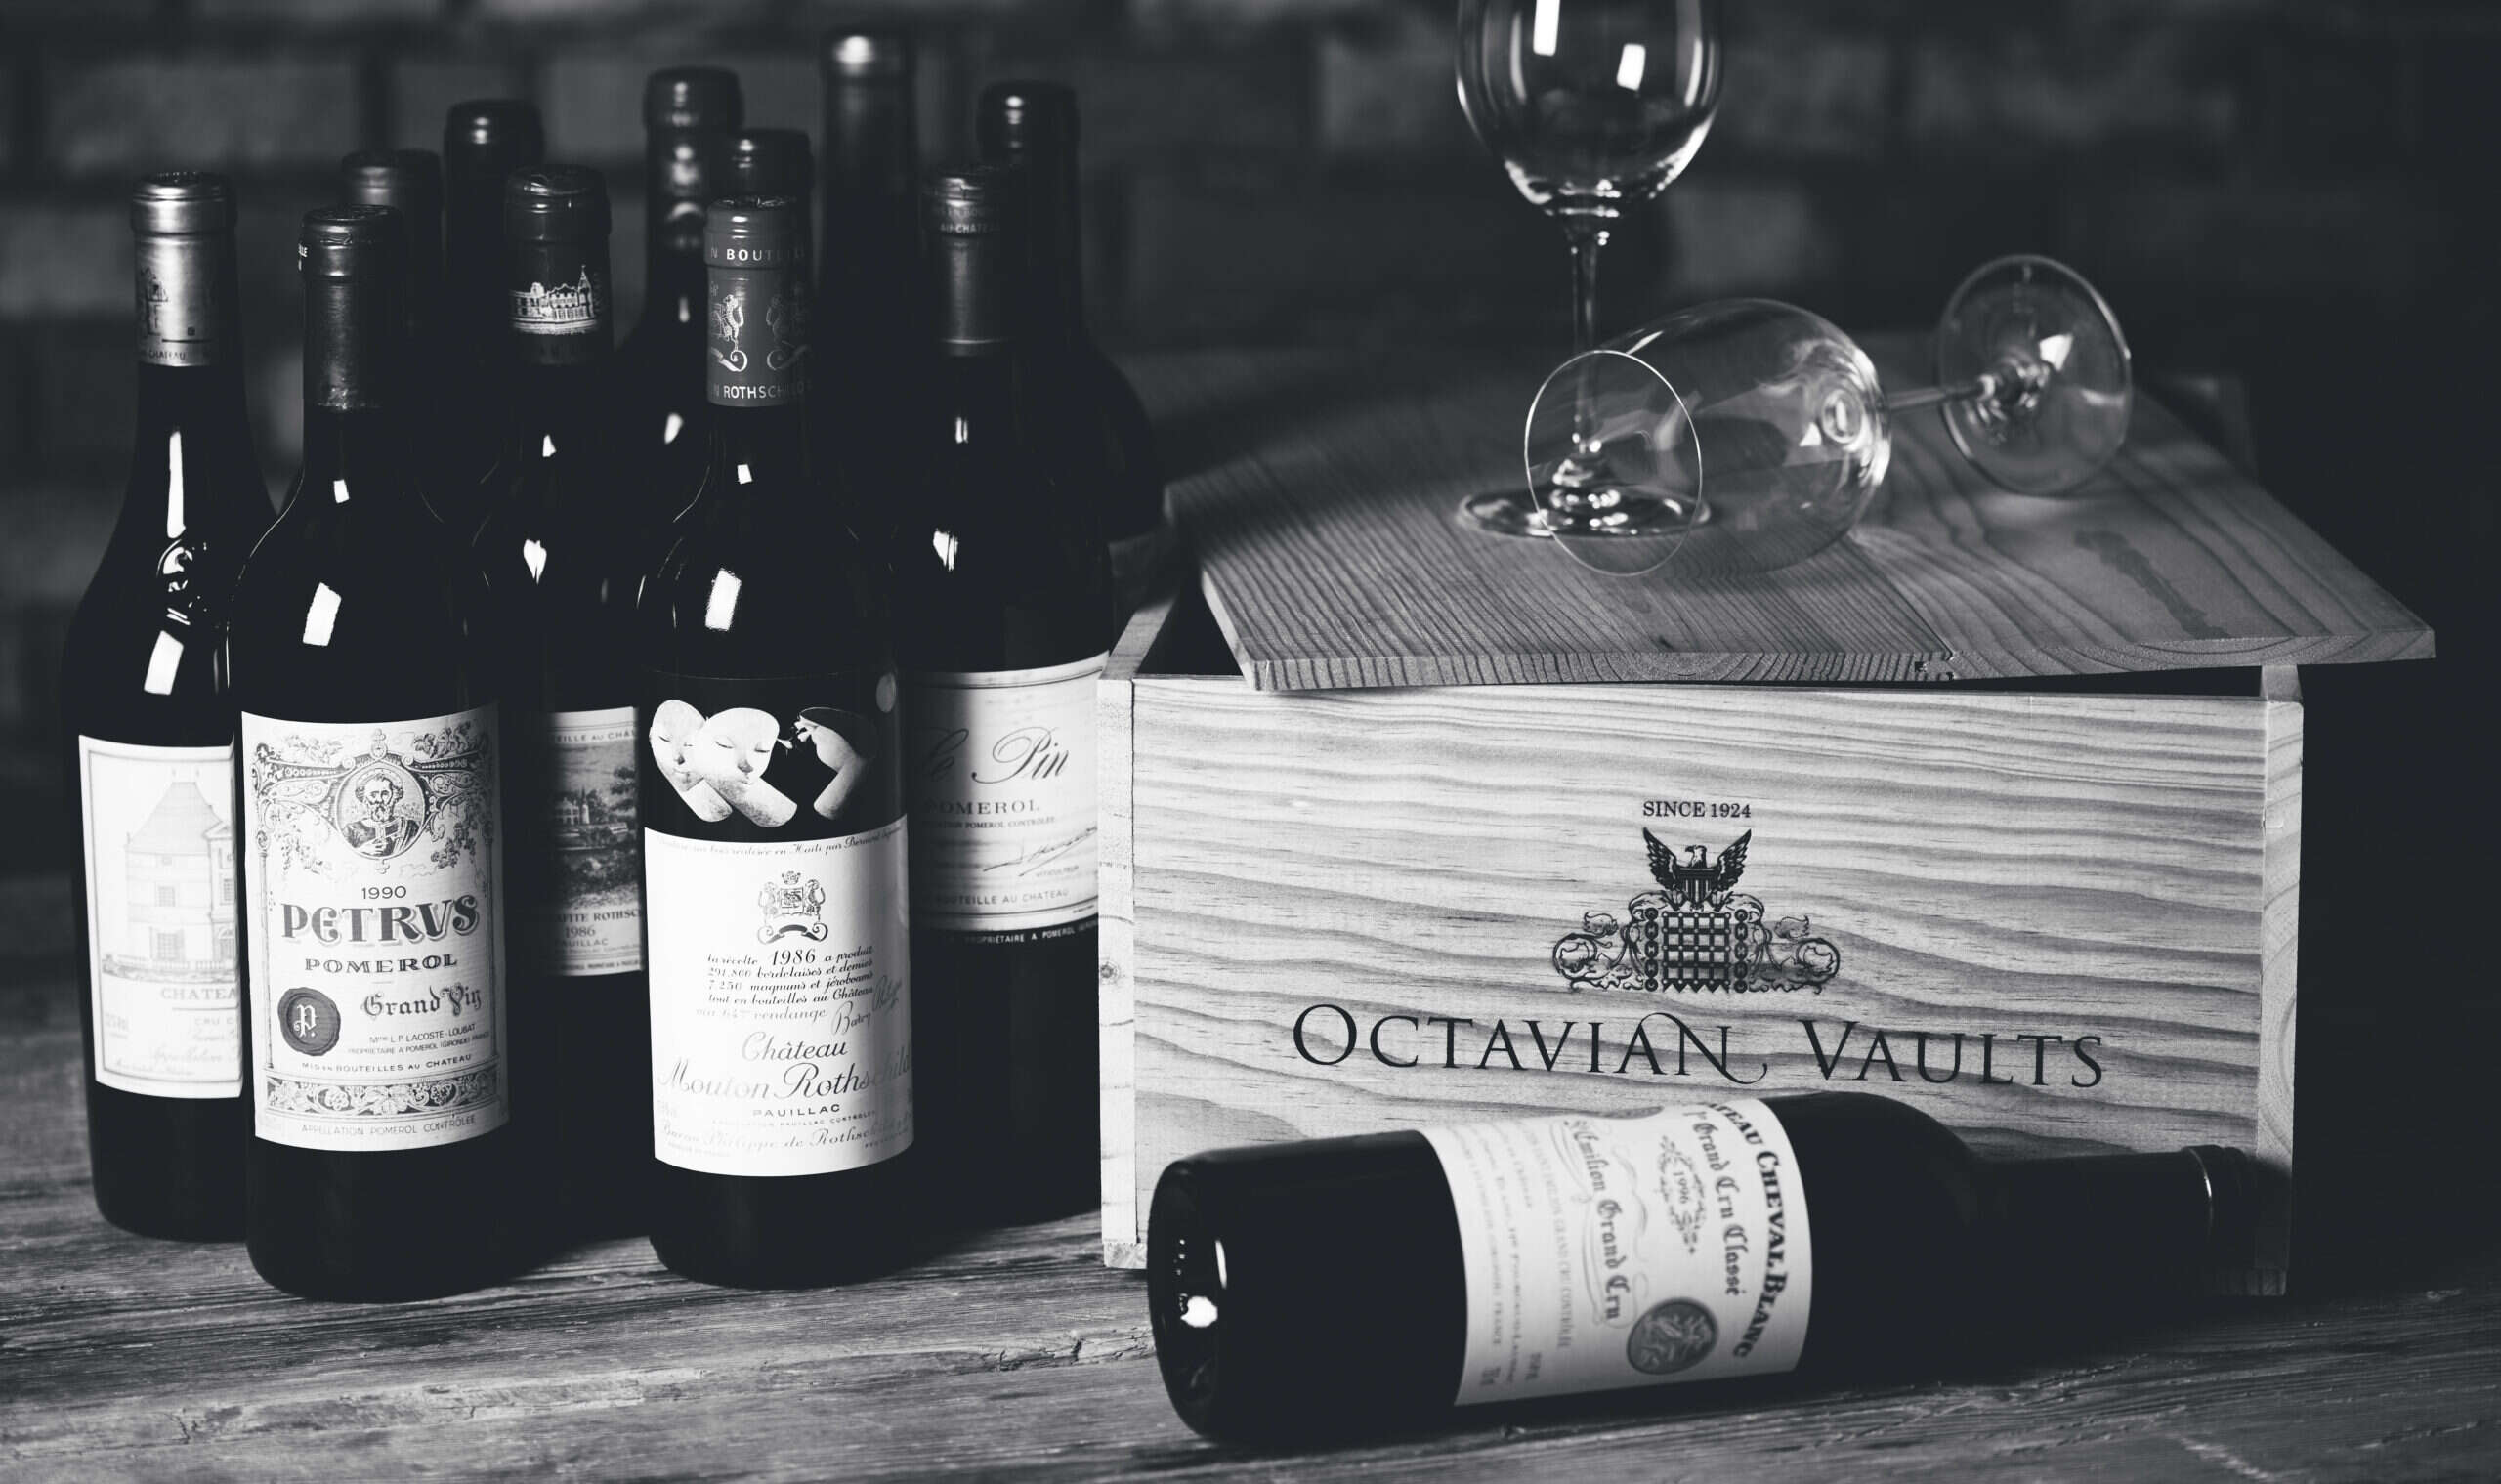 Behind the Scenes Storing Fine Wine at Octavian